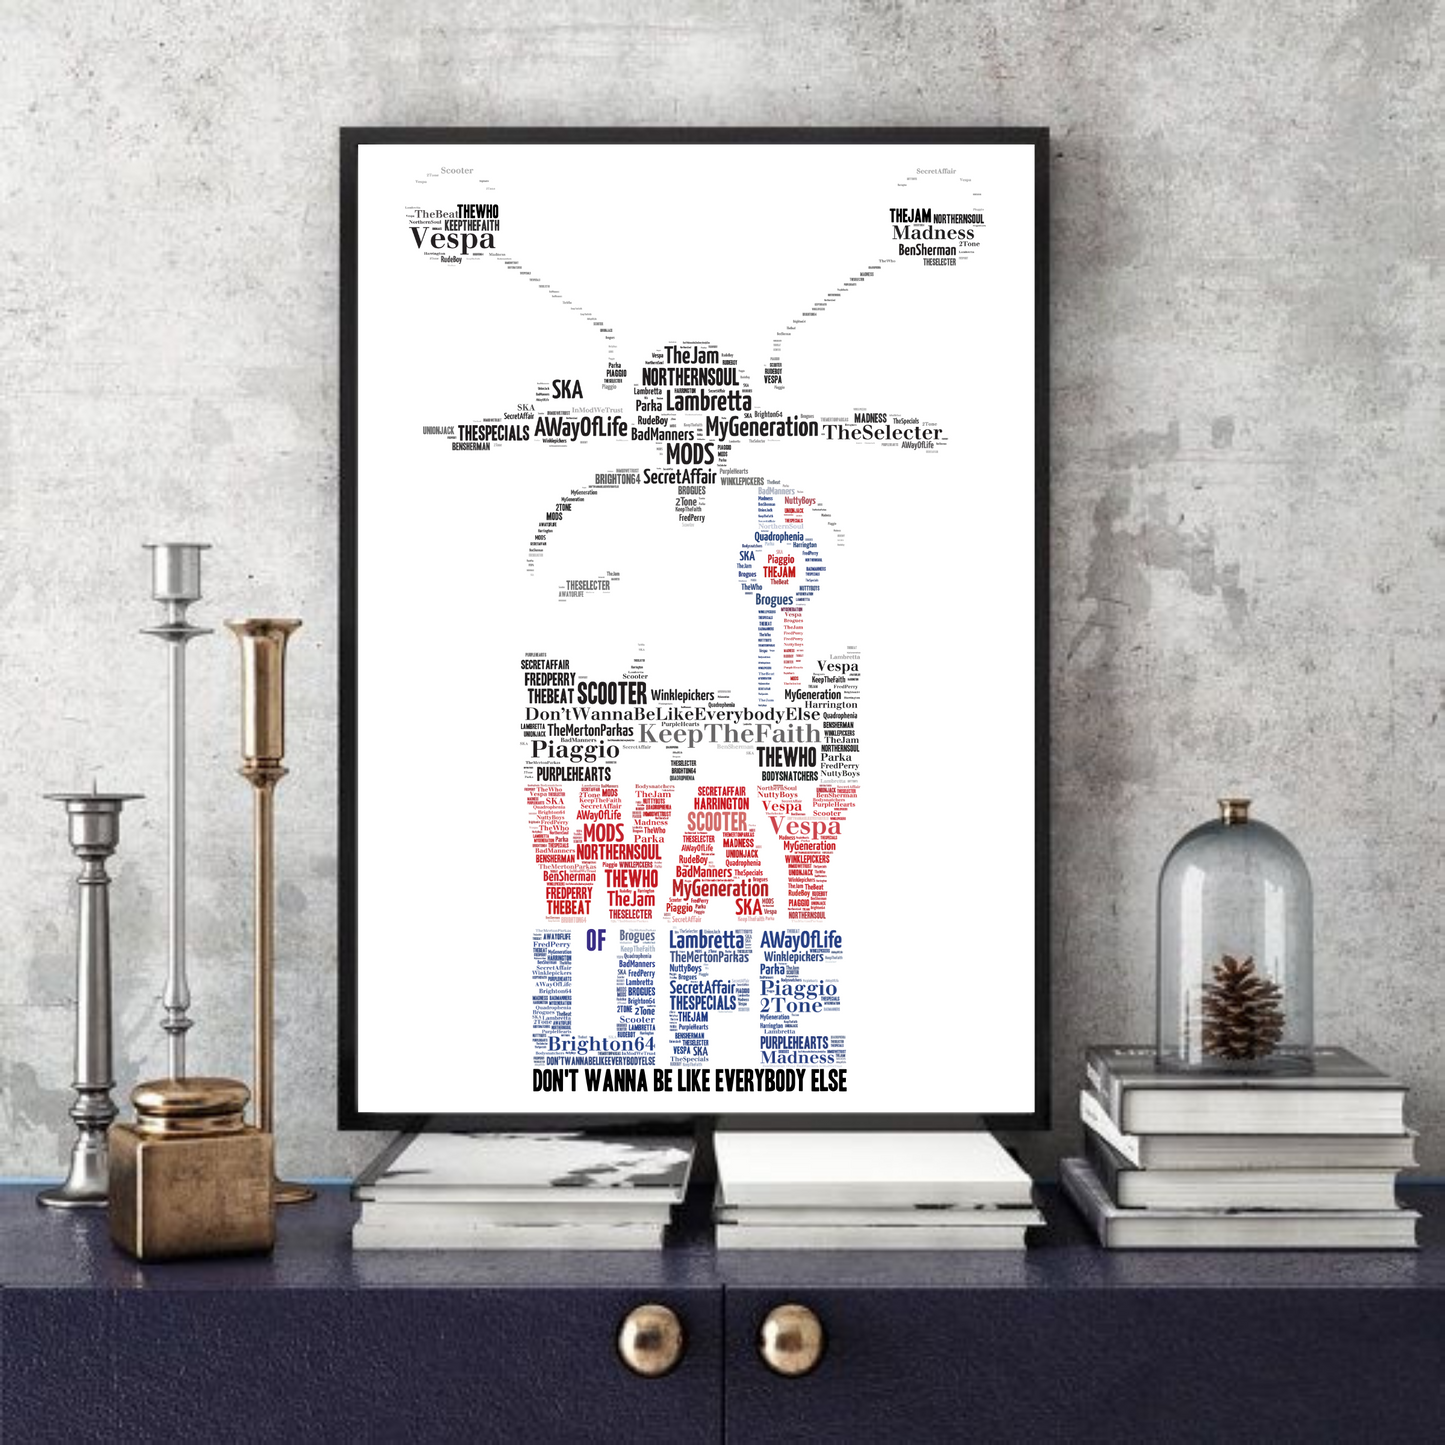 It's a way of life / In Mod we trust Typography print